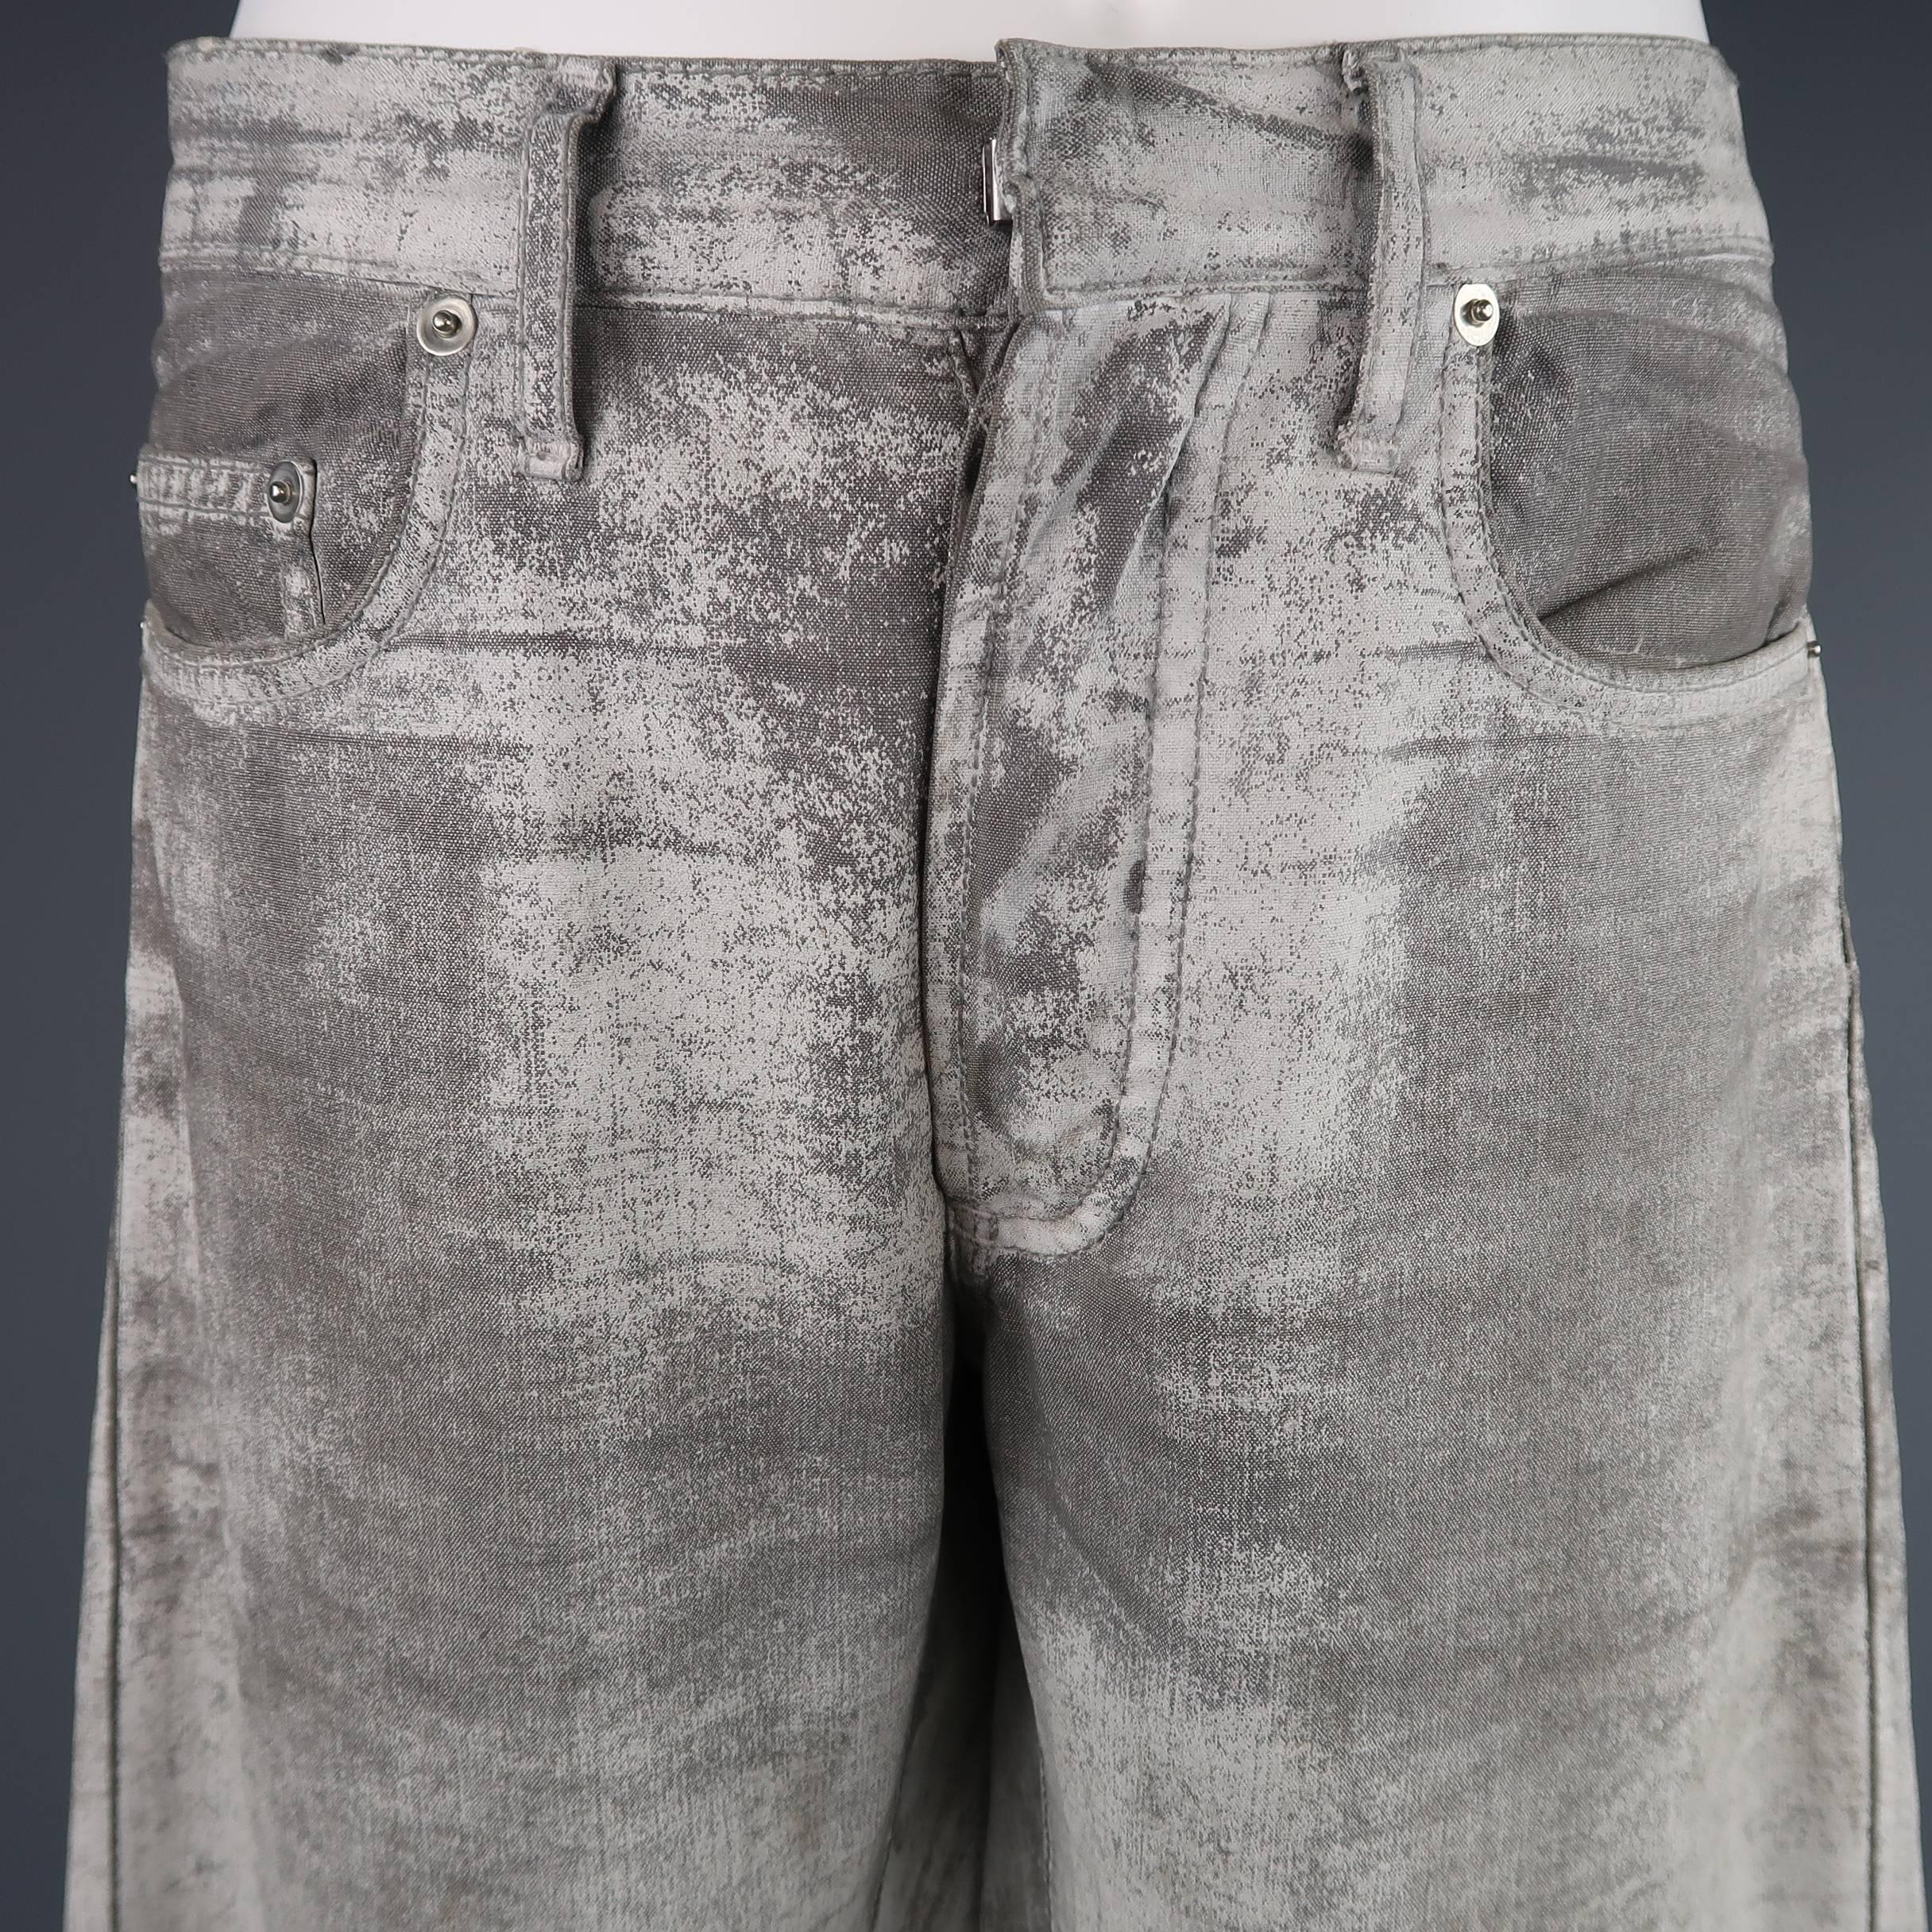 DIOR HOMME skinny jeans by Hedi Slimane come in a light weight gray stretch cotton canvas with all over marbled distressed paint effect. Minor wear and discolorations. Made in Japan.
 
Good Pre-Owned Condition.
Marked: 31
 
Measurements:
 
Waist: 33